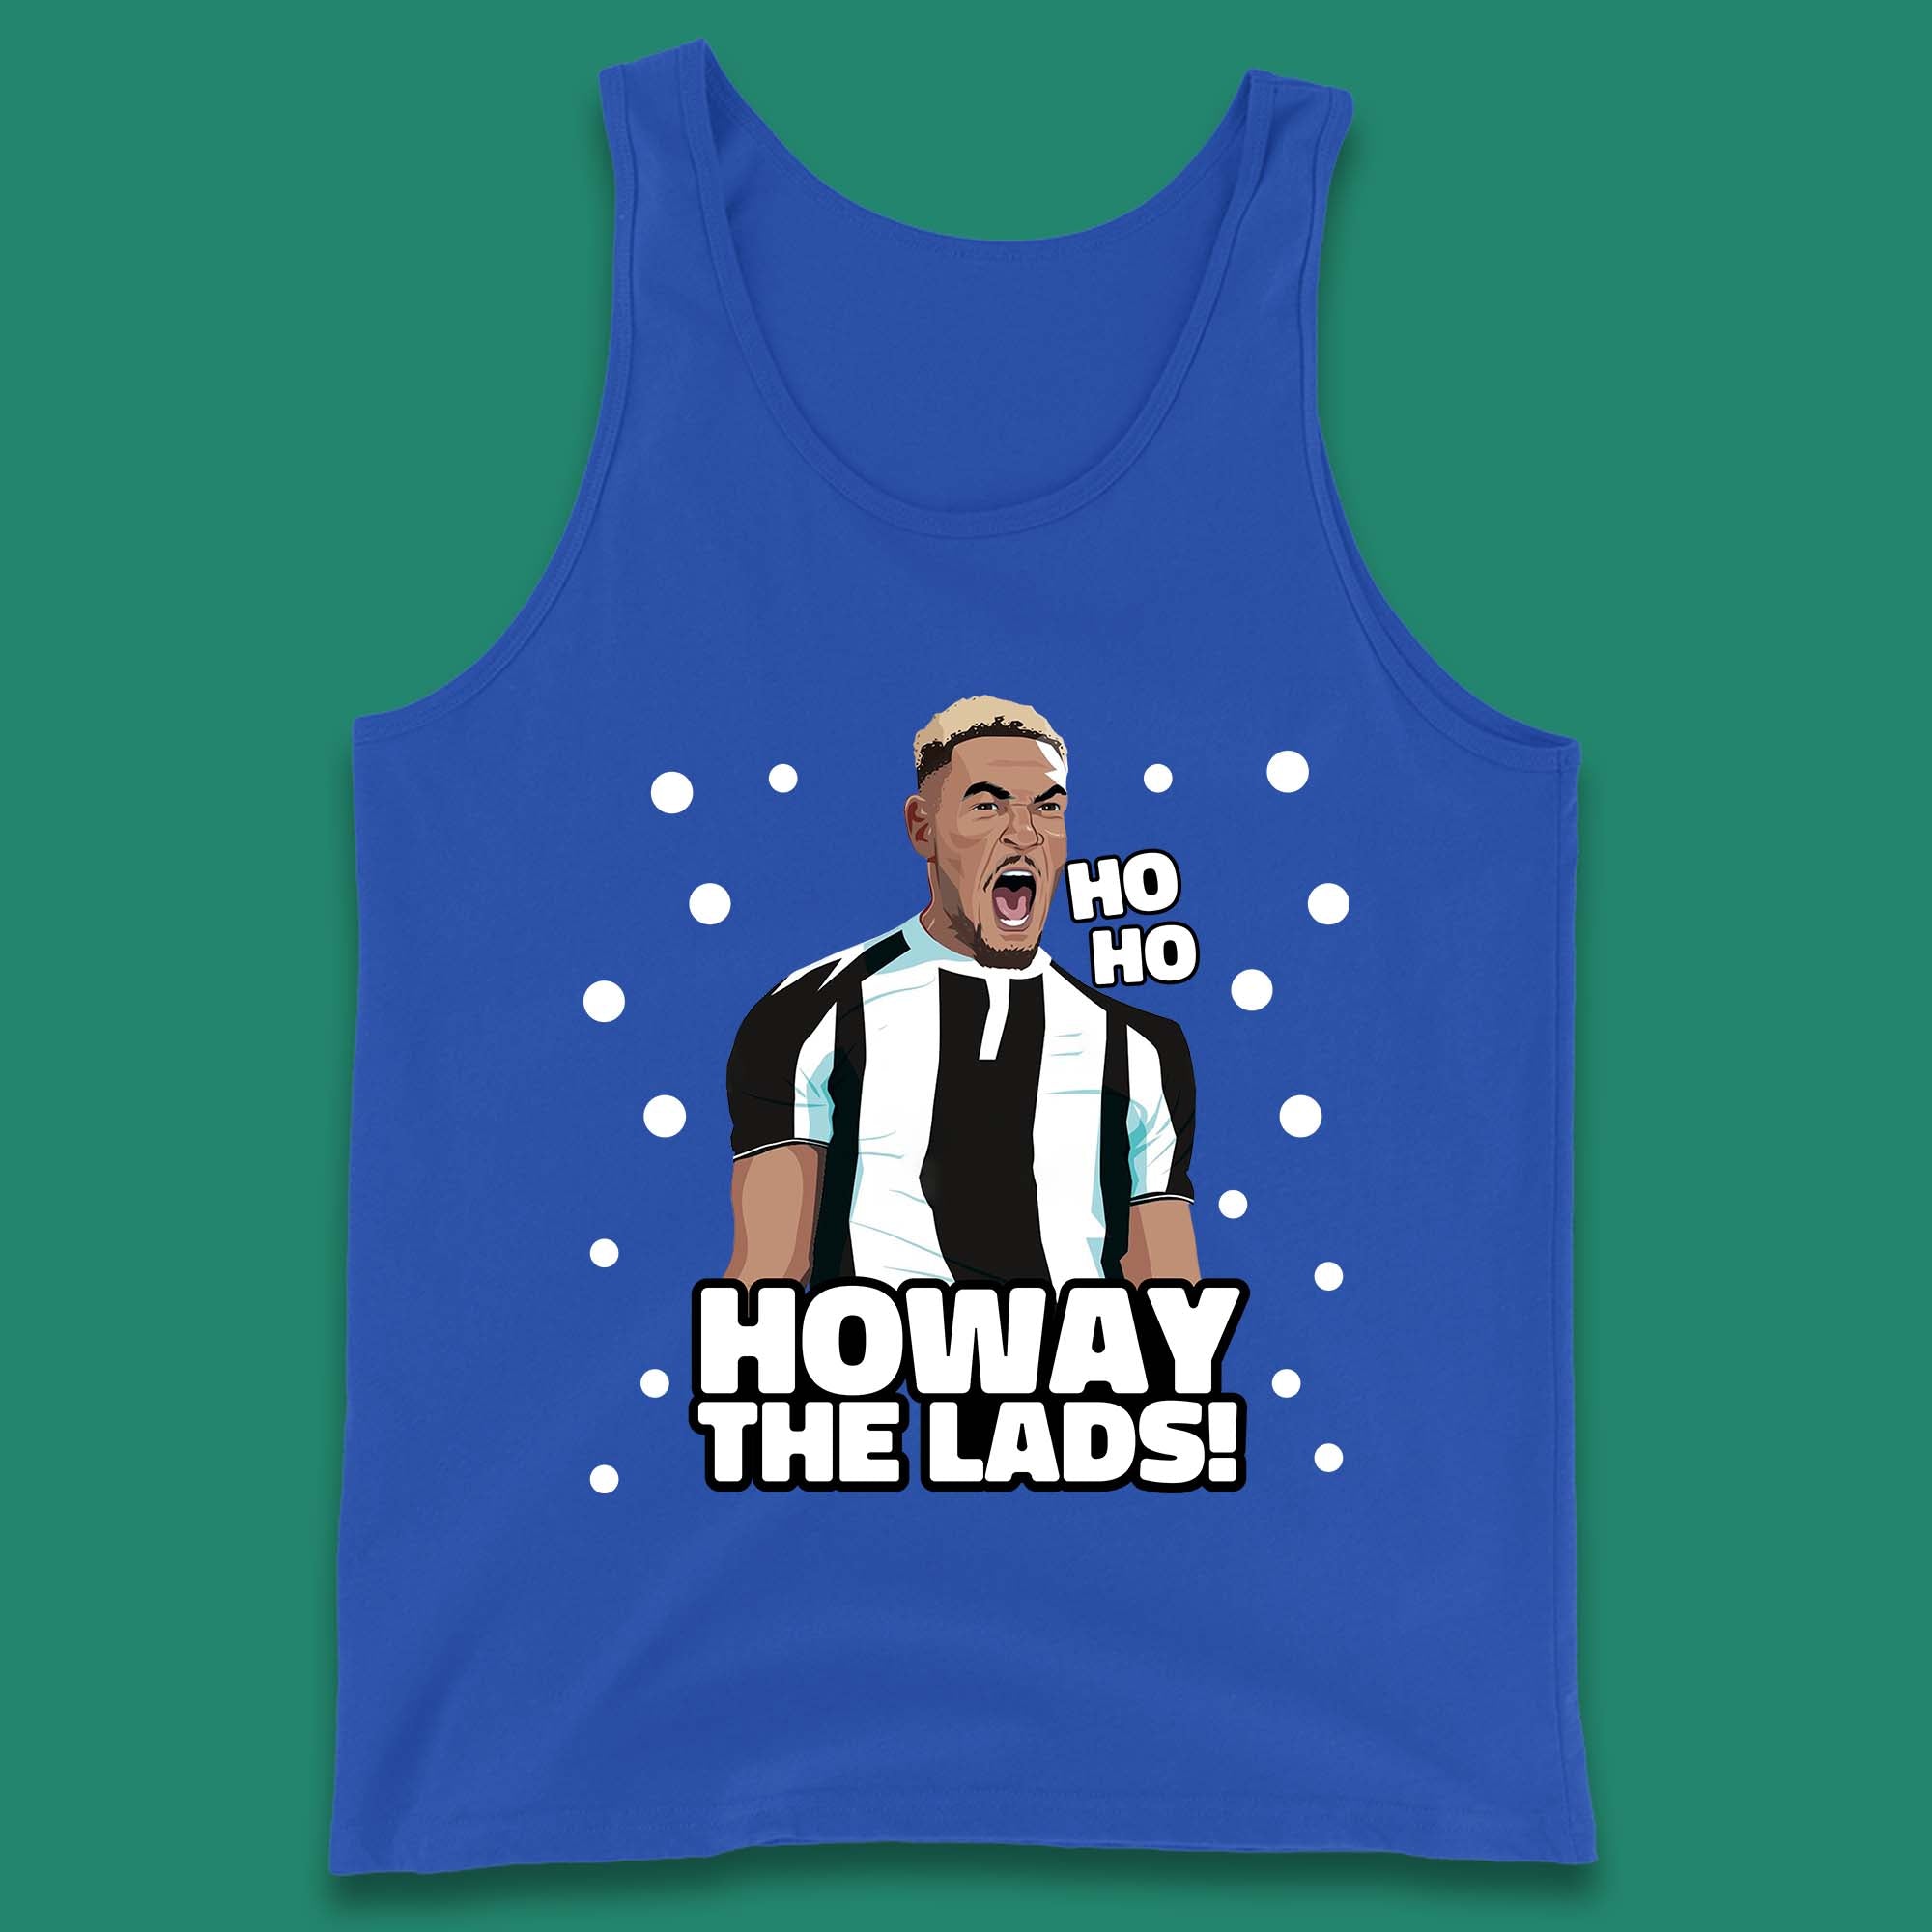 Howay The Lads! Christmas Tank Top